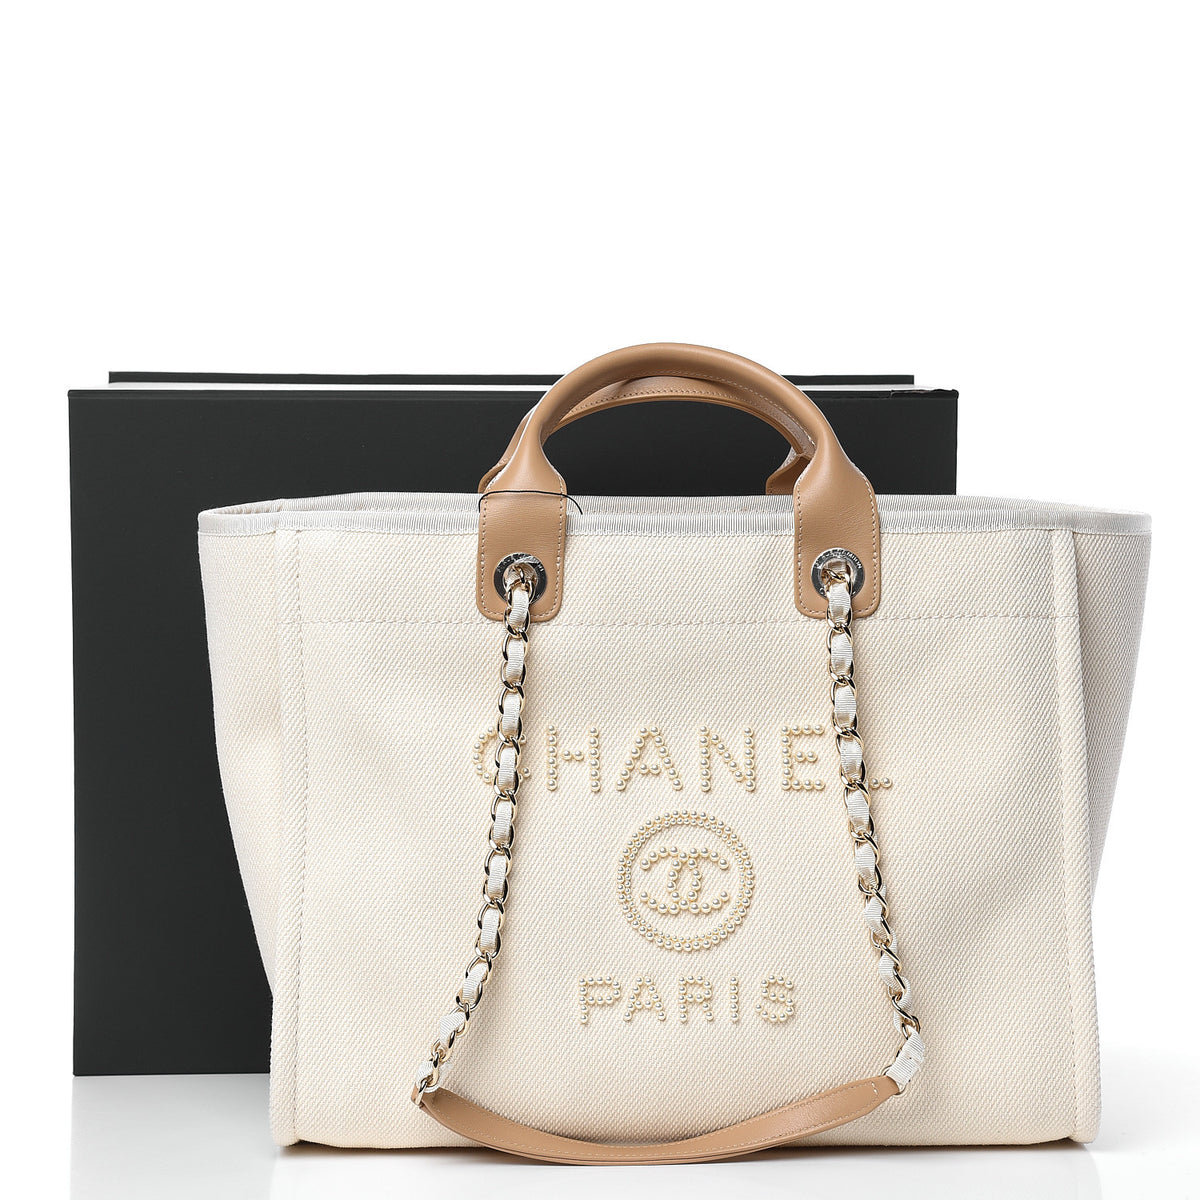 CHANEL 2020 Limited Canvas Pearl Large Deauville Tote Ecru Beige